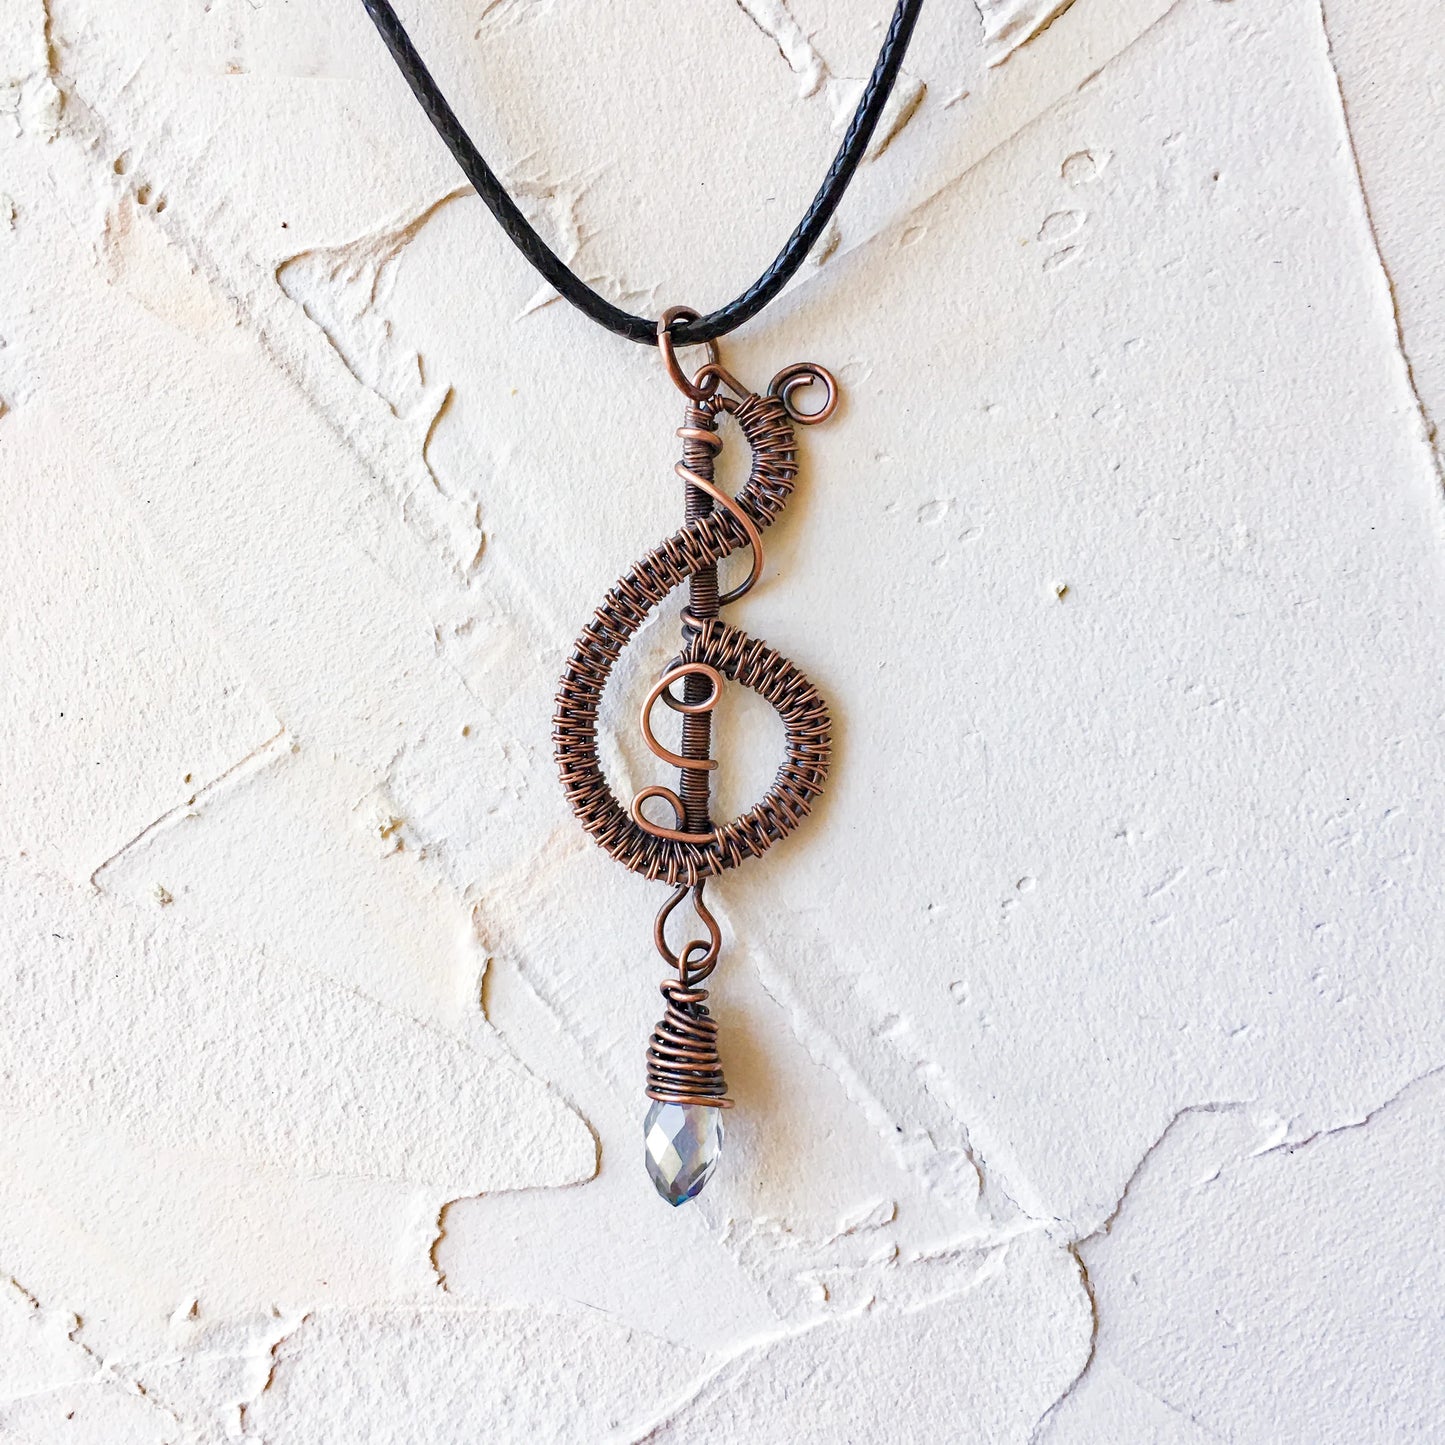 Copper Wire Woven Treble Clef with Crystal